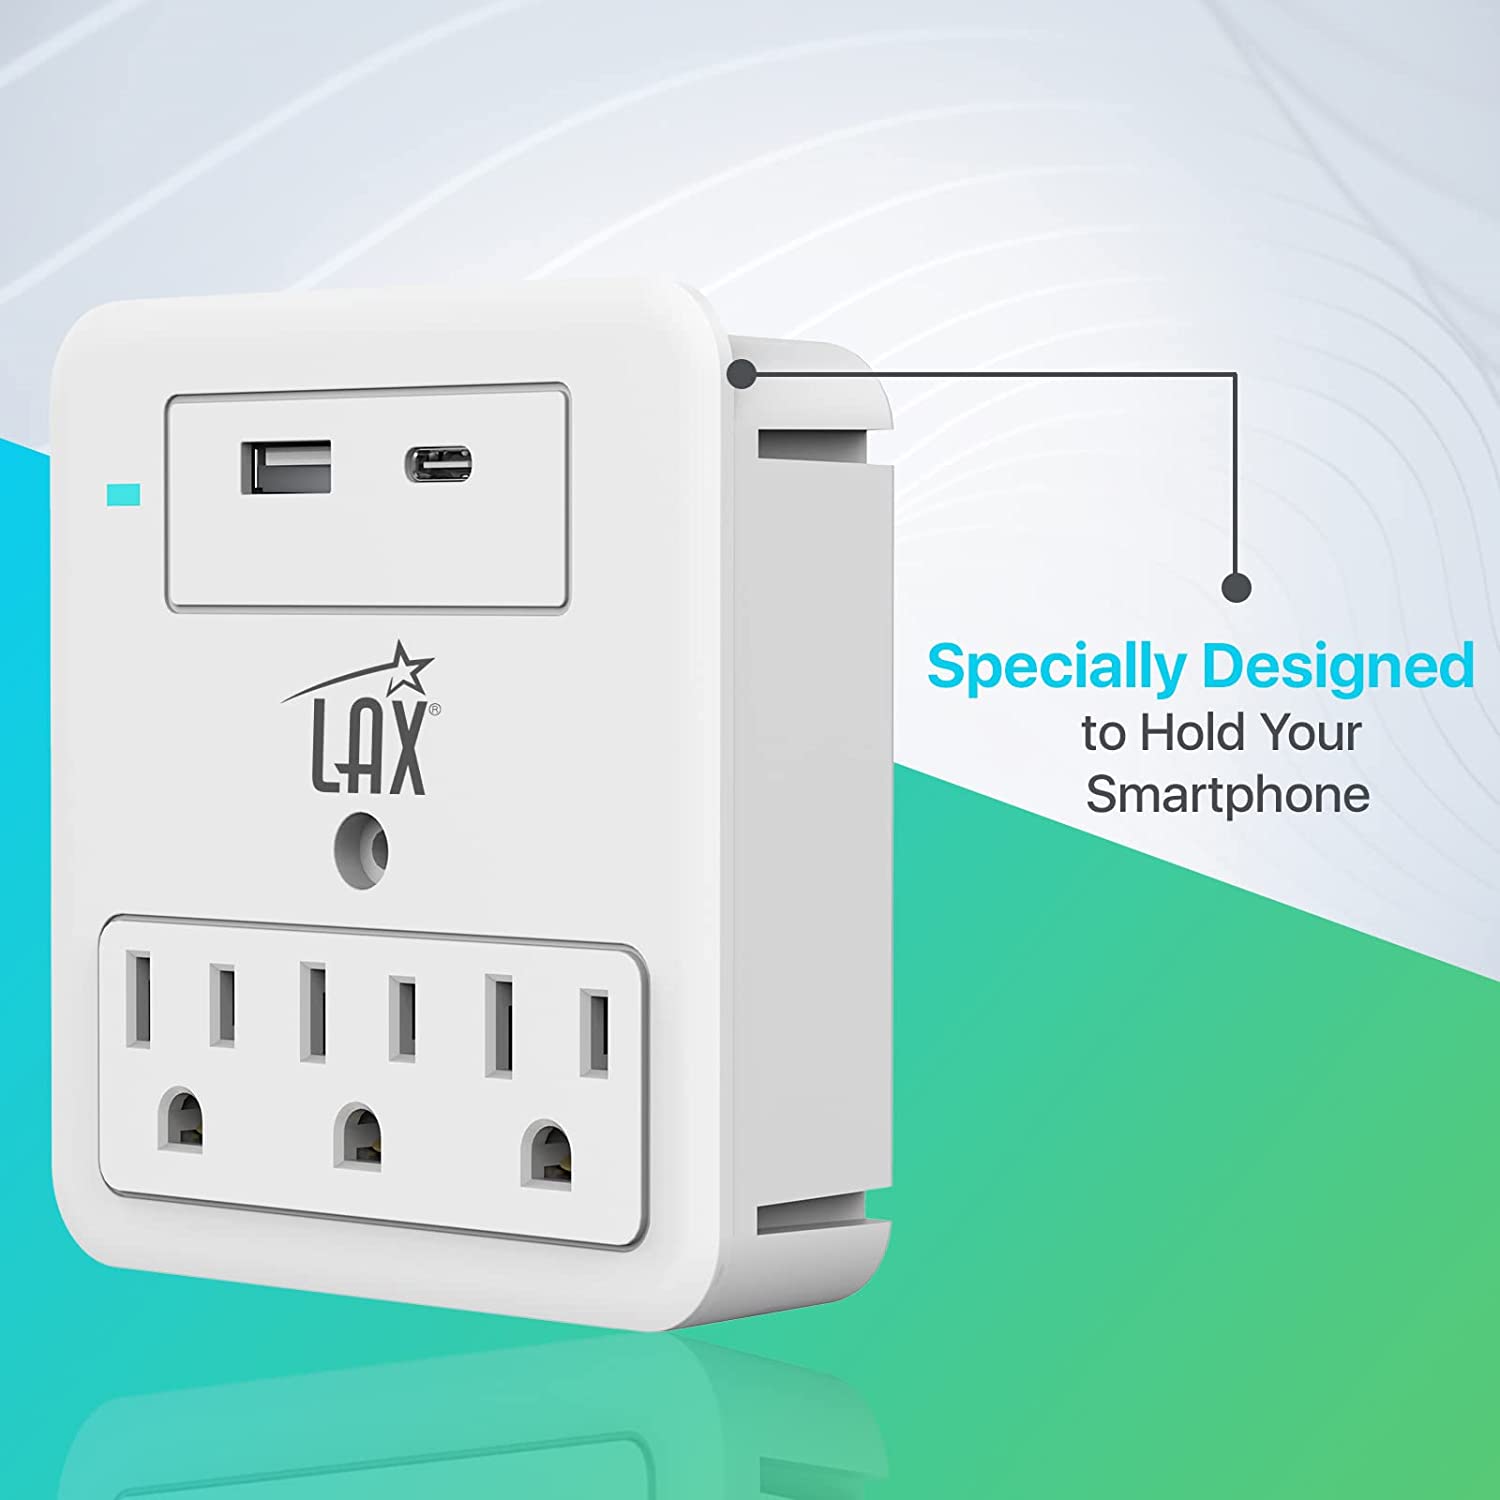 Multi-Plug Surge Protector 2/3 Wall Outlet Extender - USB-A & USB-C Port (White)